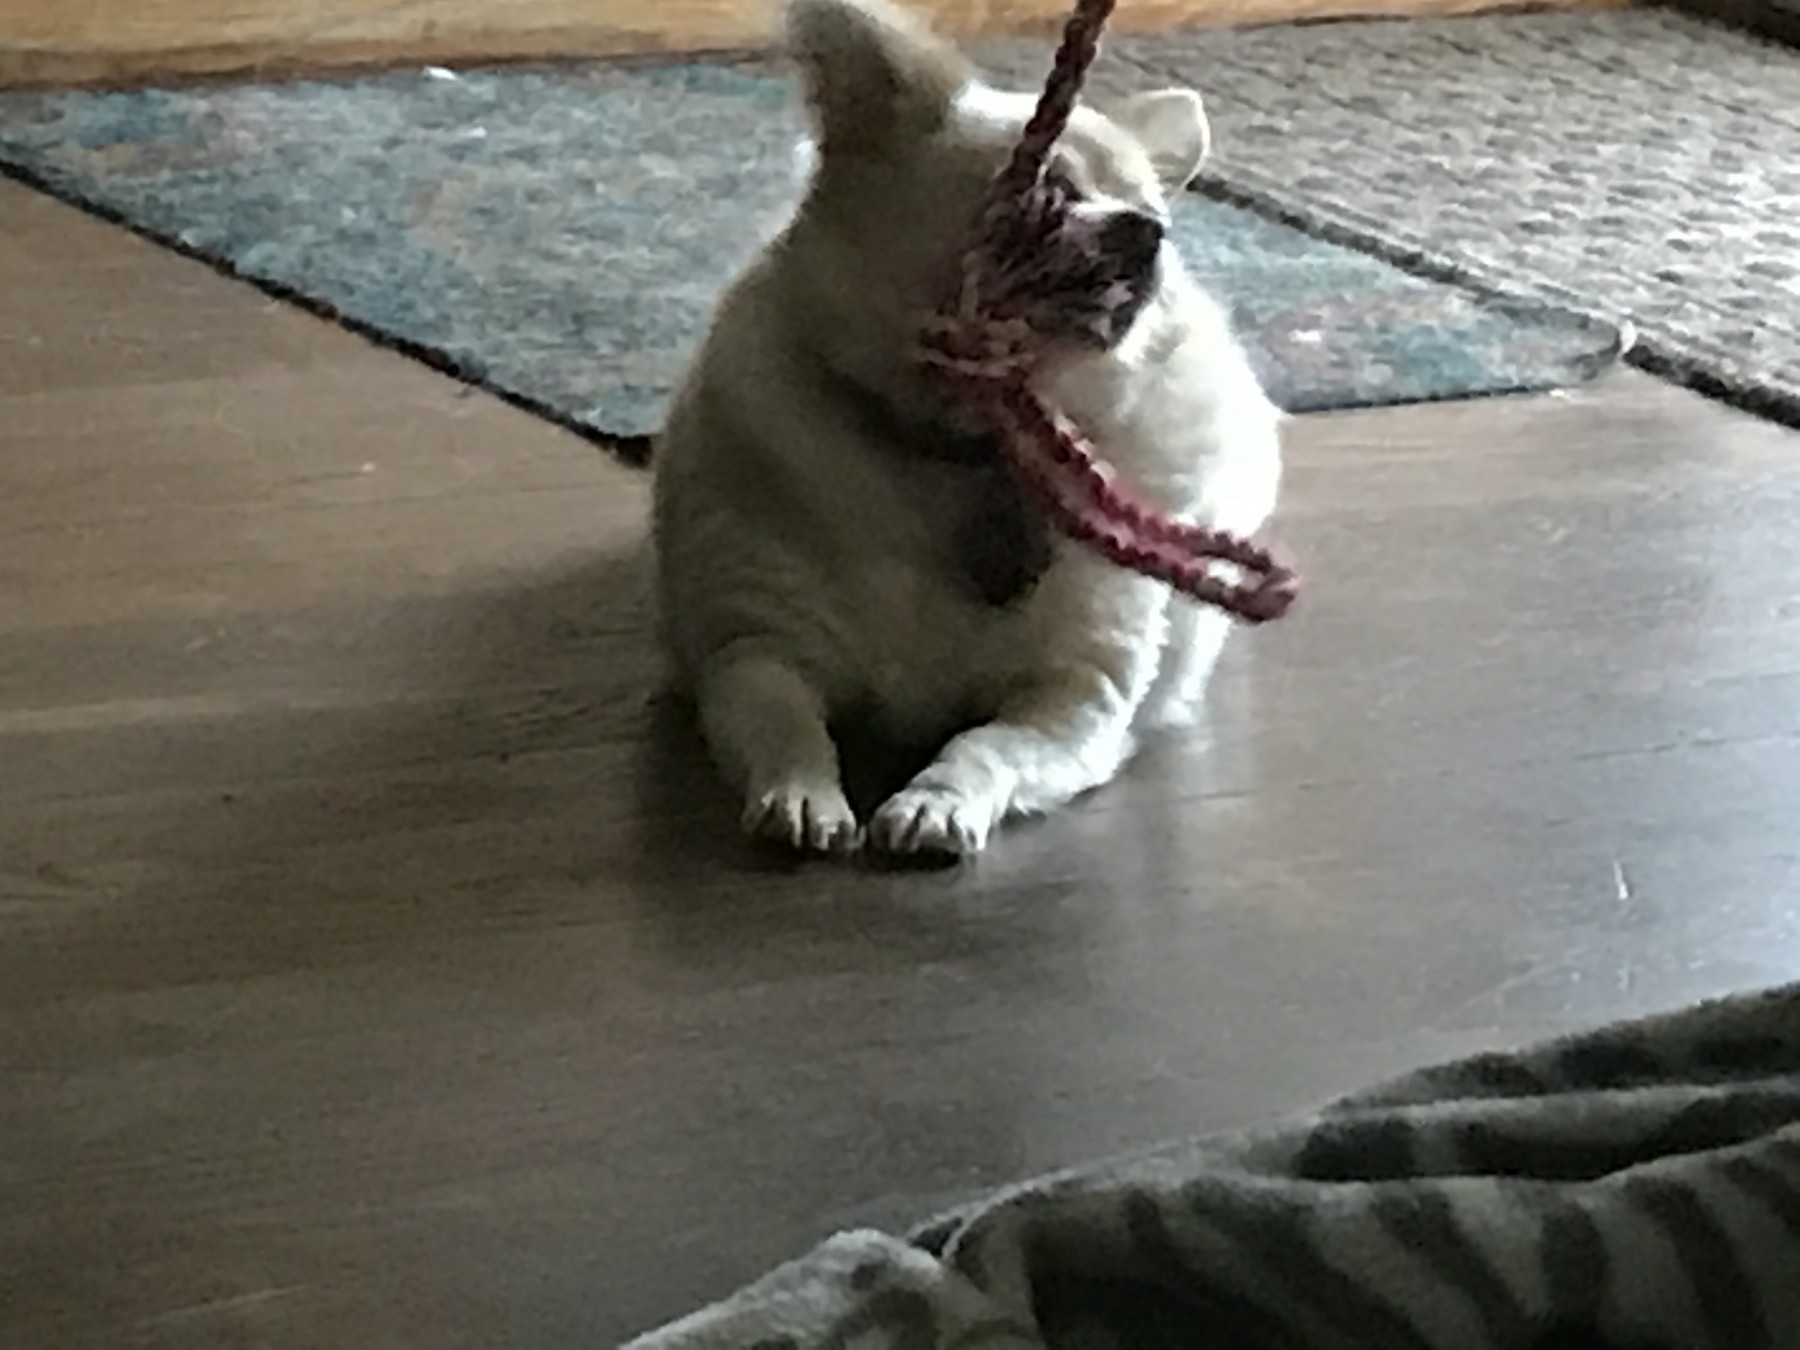 Love the bowl and rope toys!!!